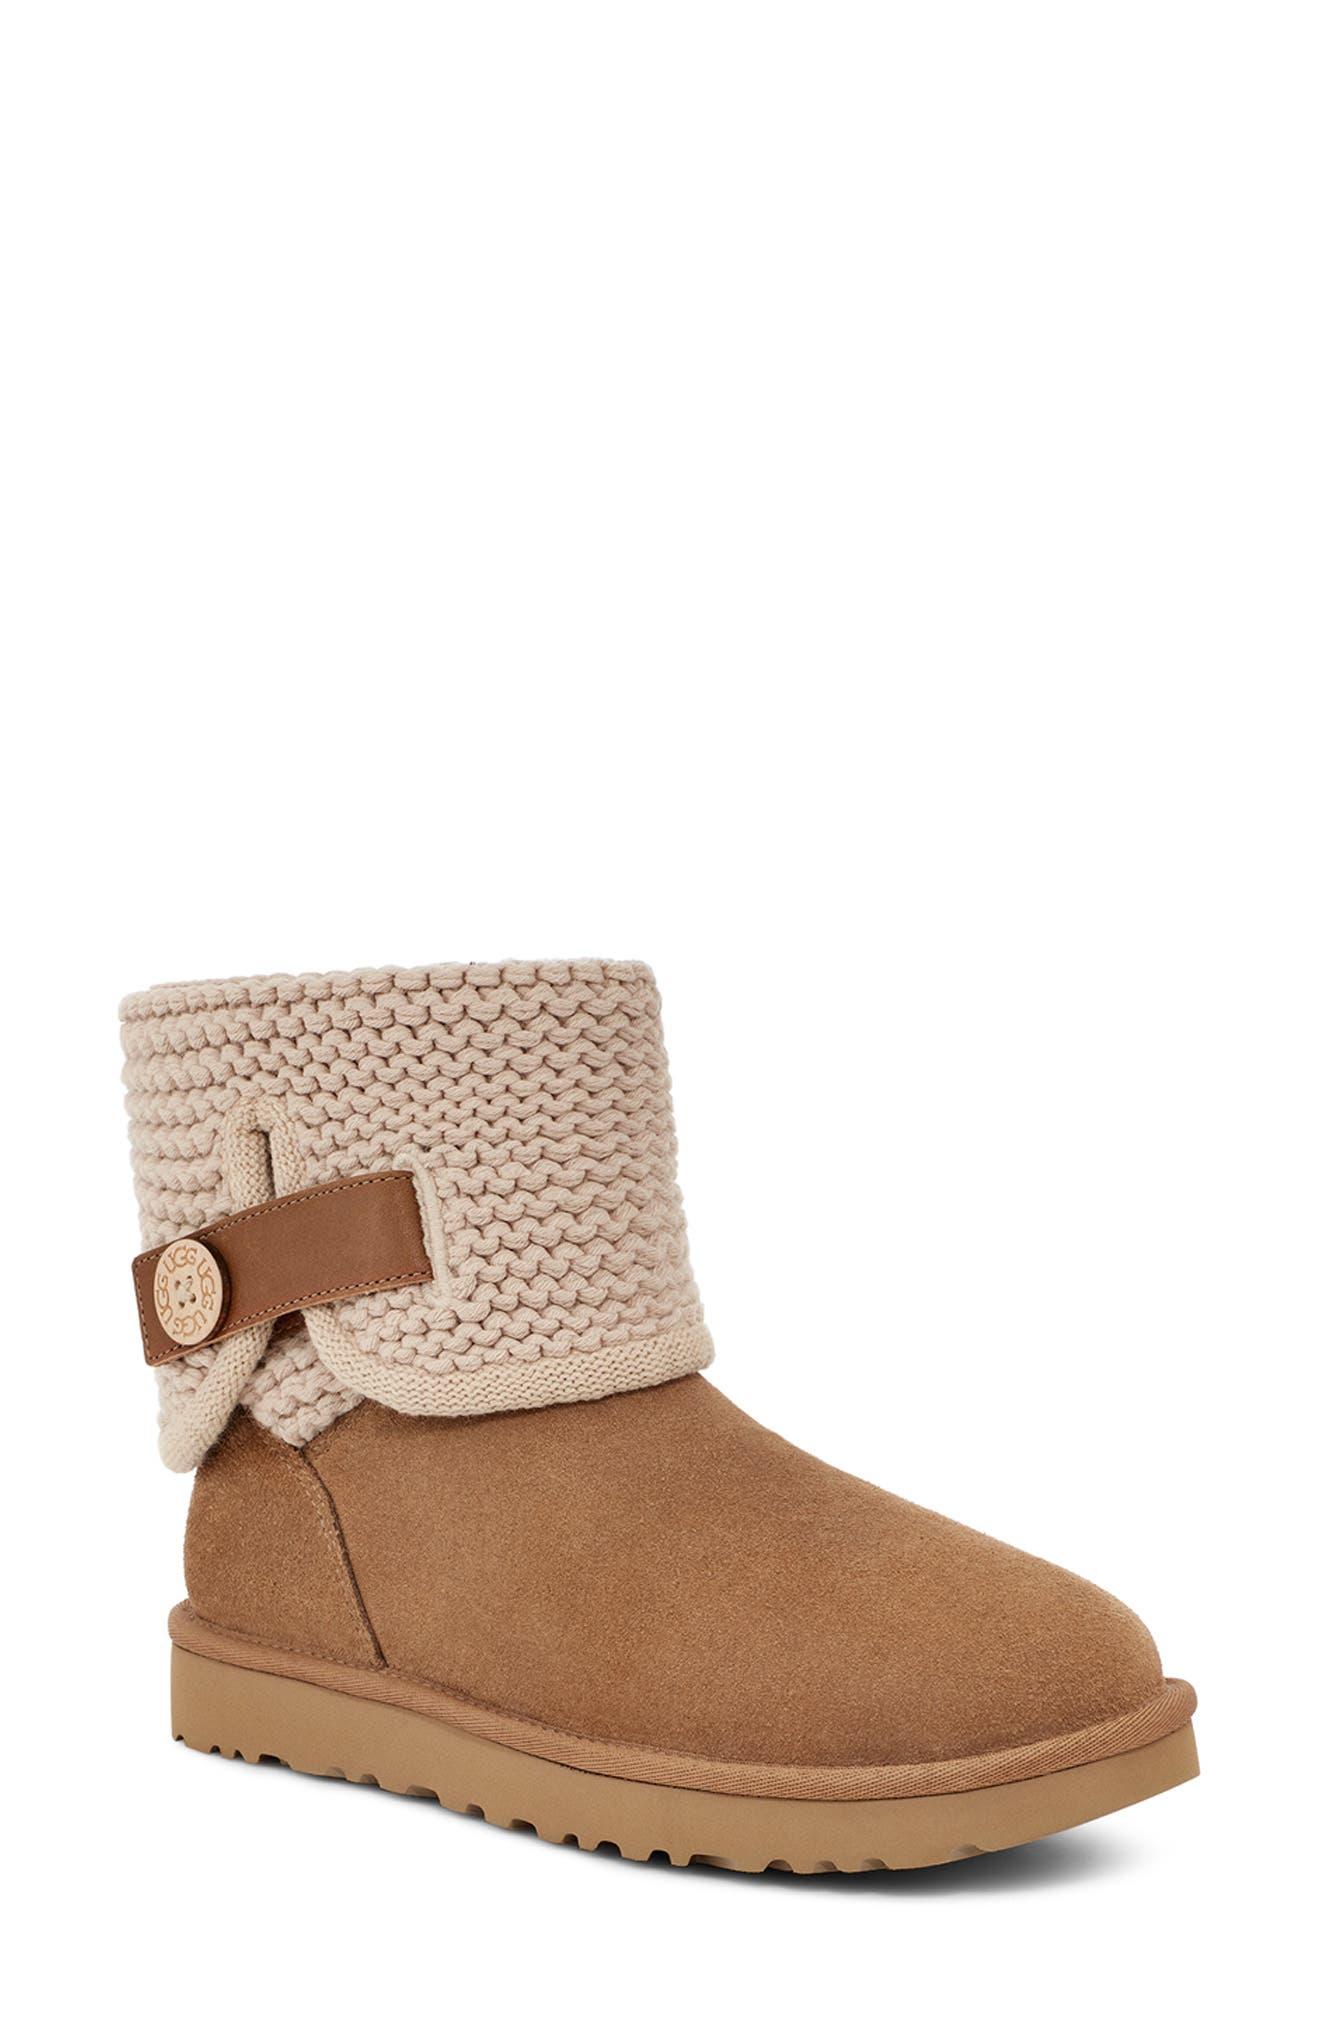 UGG Shaina Boot In Chestnut At Nordstrom Rack in Brown | Lyst